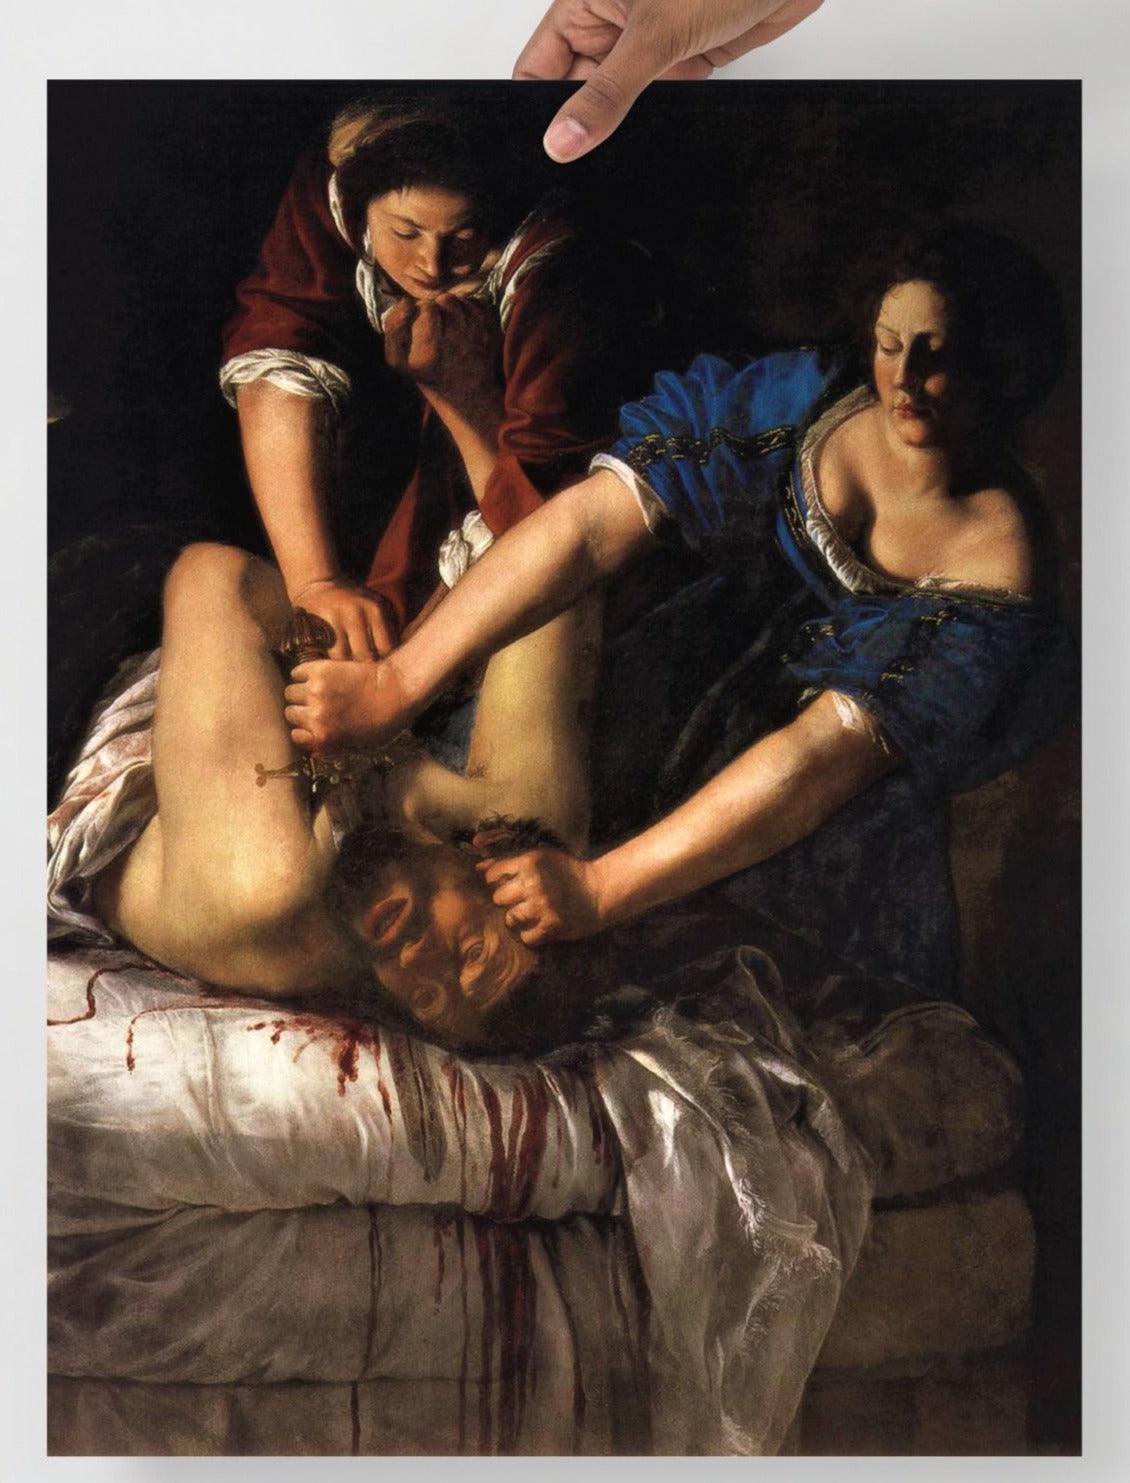 A Judith beheading Holofernes by Artemisia Gentileschi poster on a plain backdrop in size 18x24”.